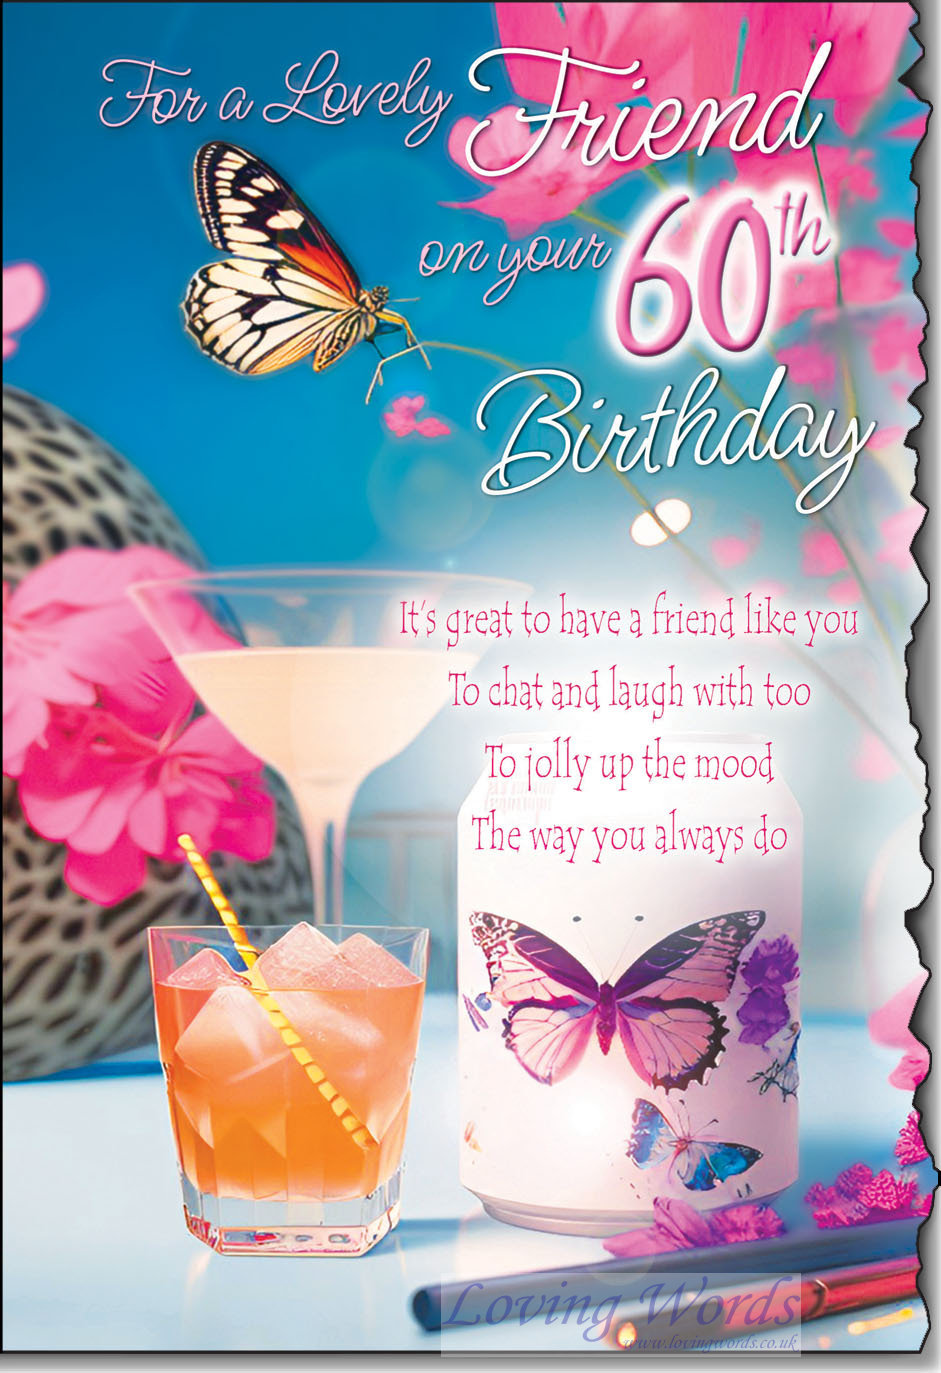 Lovely Friend 60th Birthday | Greeting Cards by Loving Words